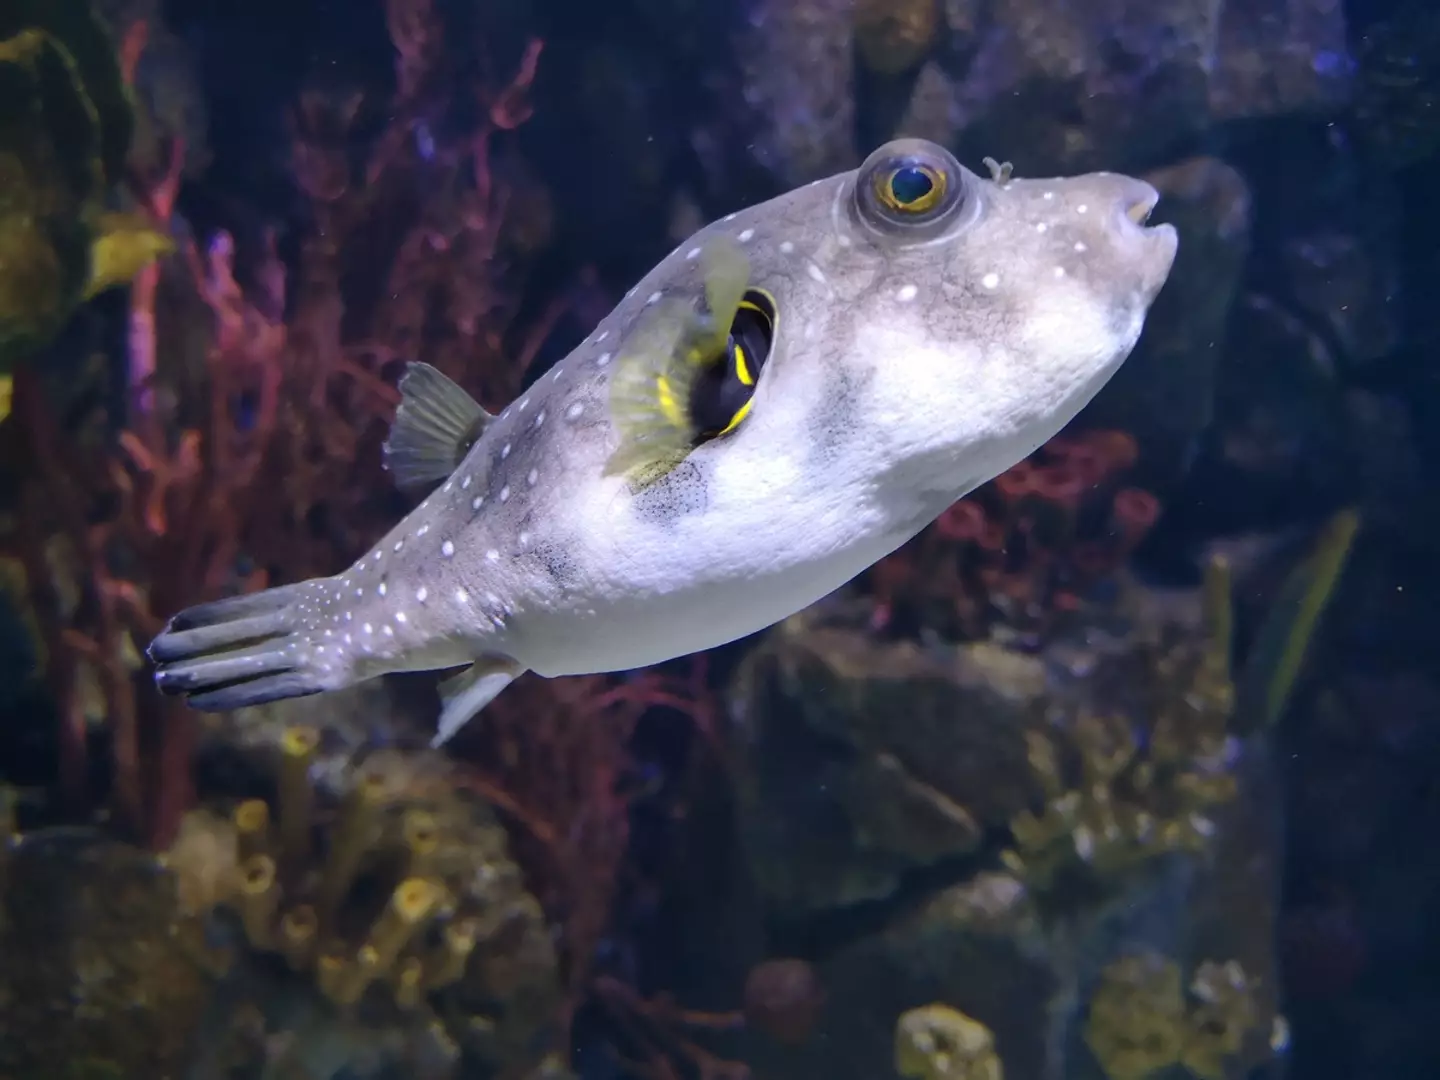 Fugu contains tetrodotoxin, which is said to be 10,000 more deadly than cyanide.